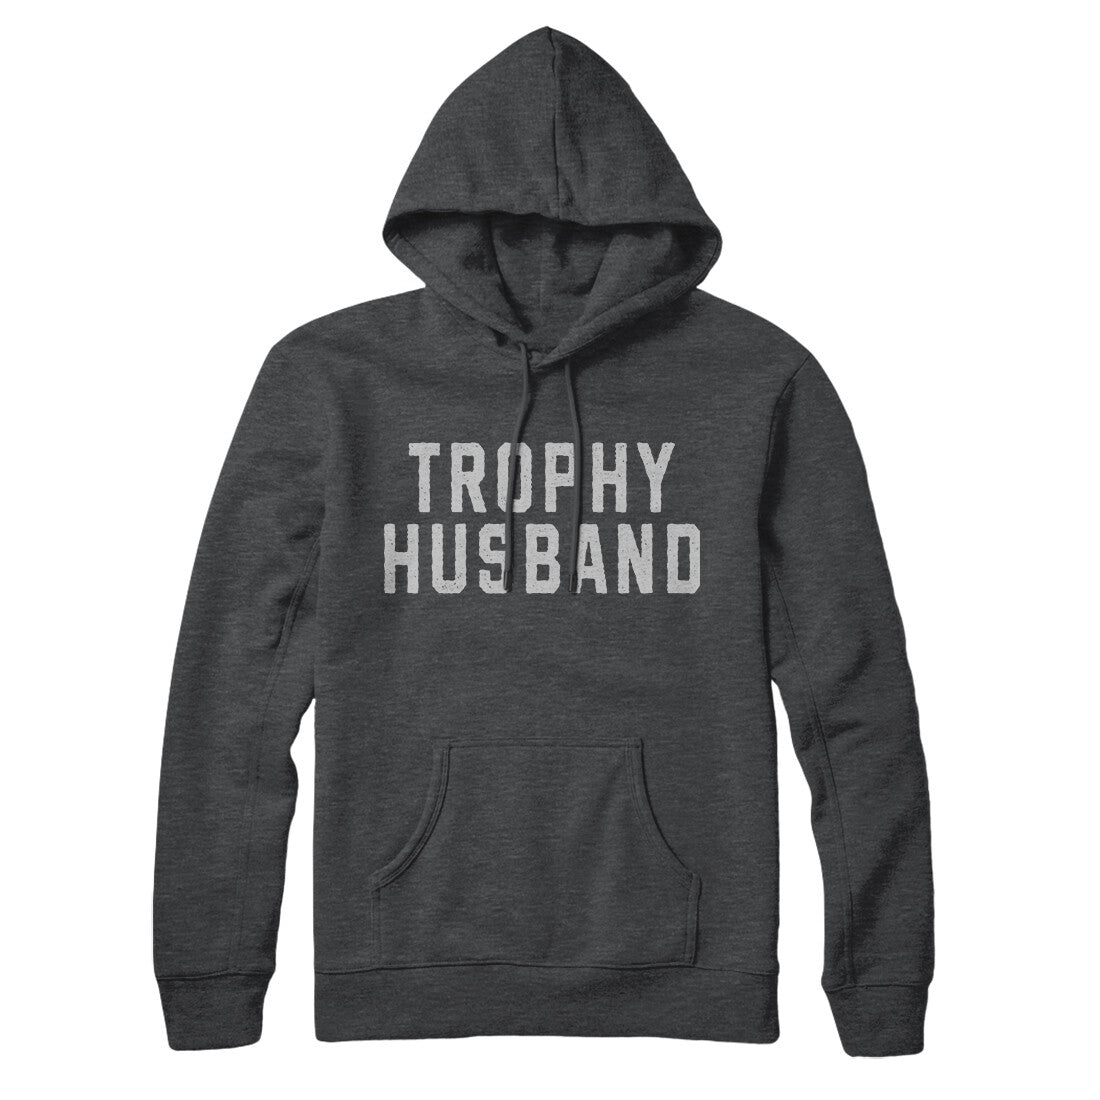 Trophy Husband in Charcoal Heather Color